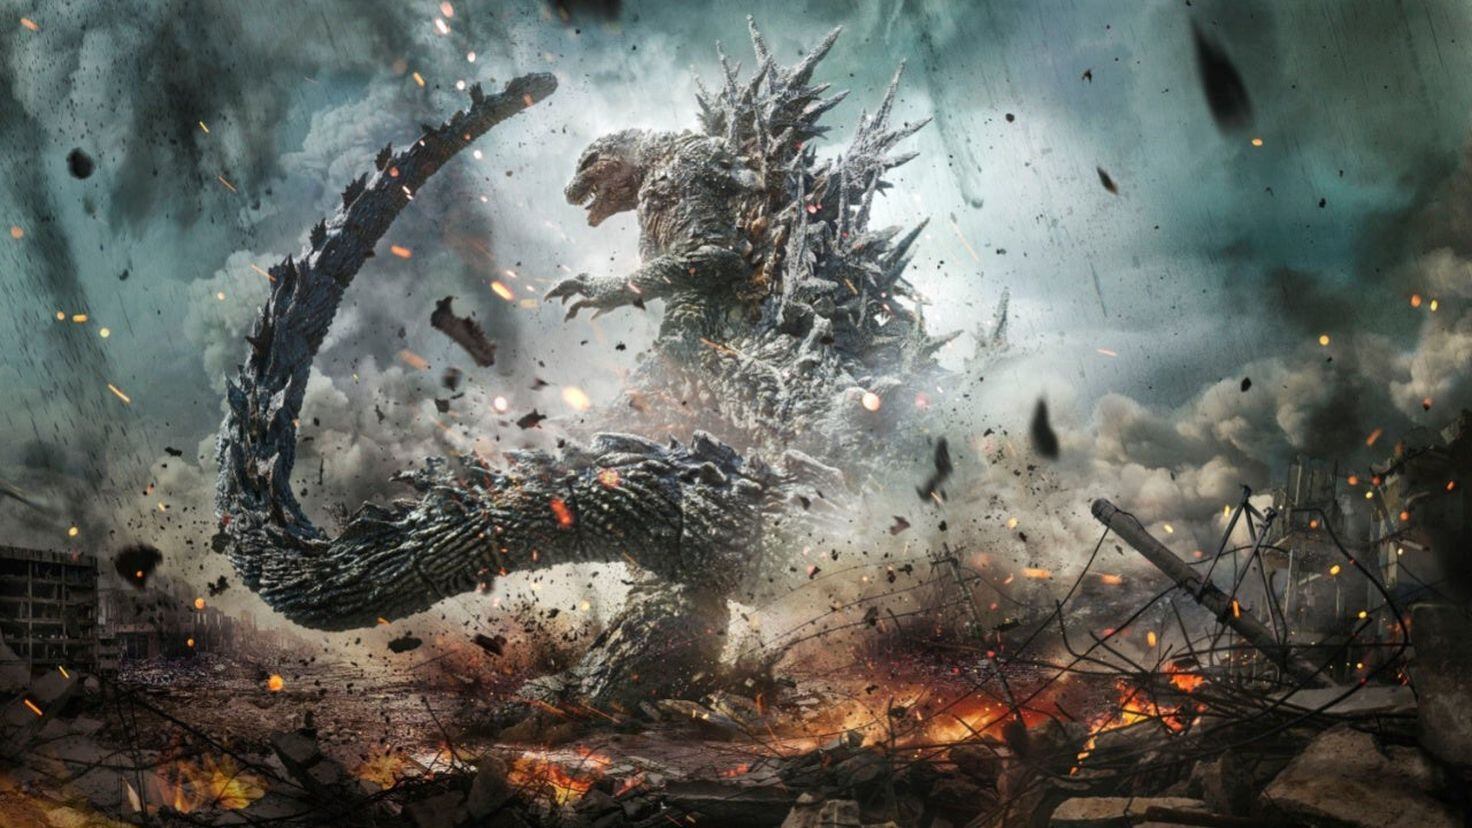 “Godzilla Minus One” is sweeping the United States, and has already been scheduled for a theatrical release in Spain